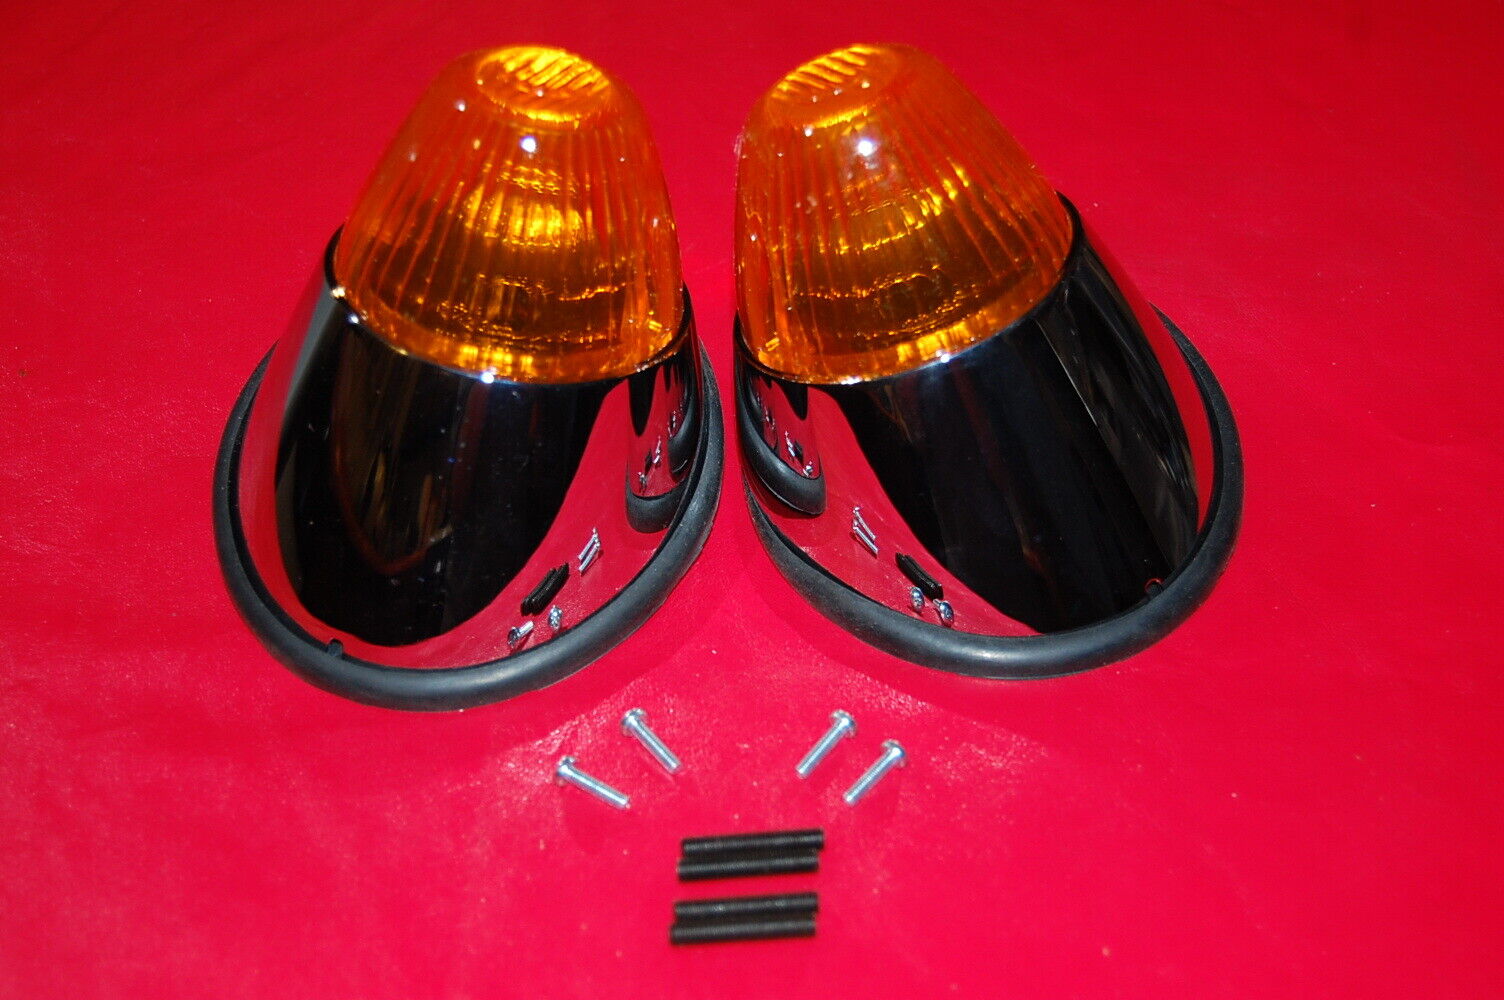 VW KARMANN GHIA FRONT TURN SIGNAL LIGHTS, COMPLETE KIT, AMBER/YELLOW, ALL YEARS